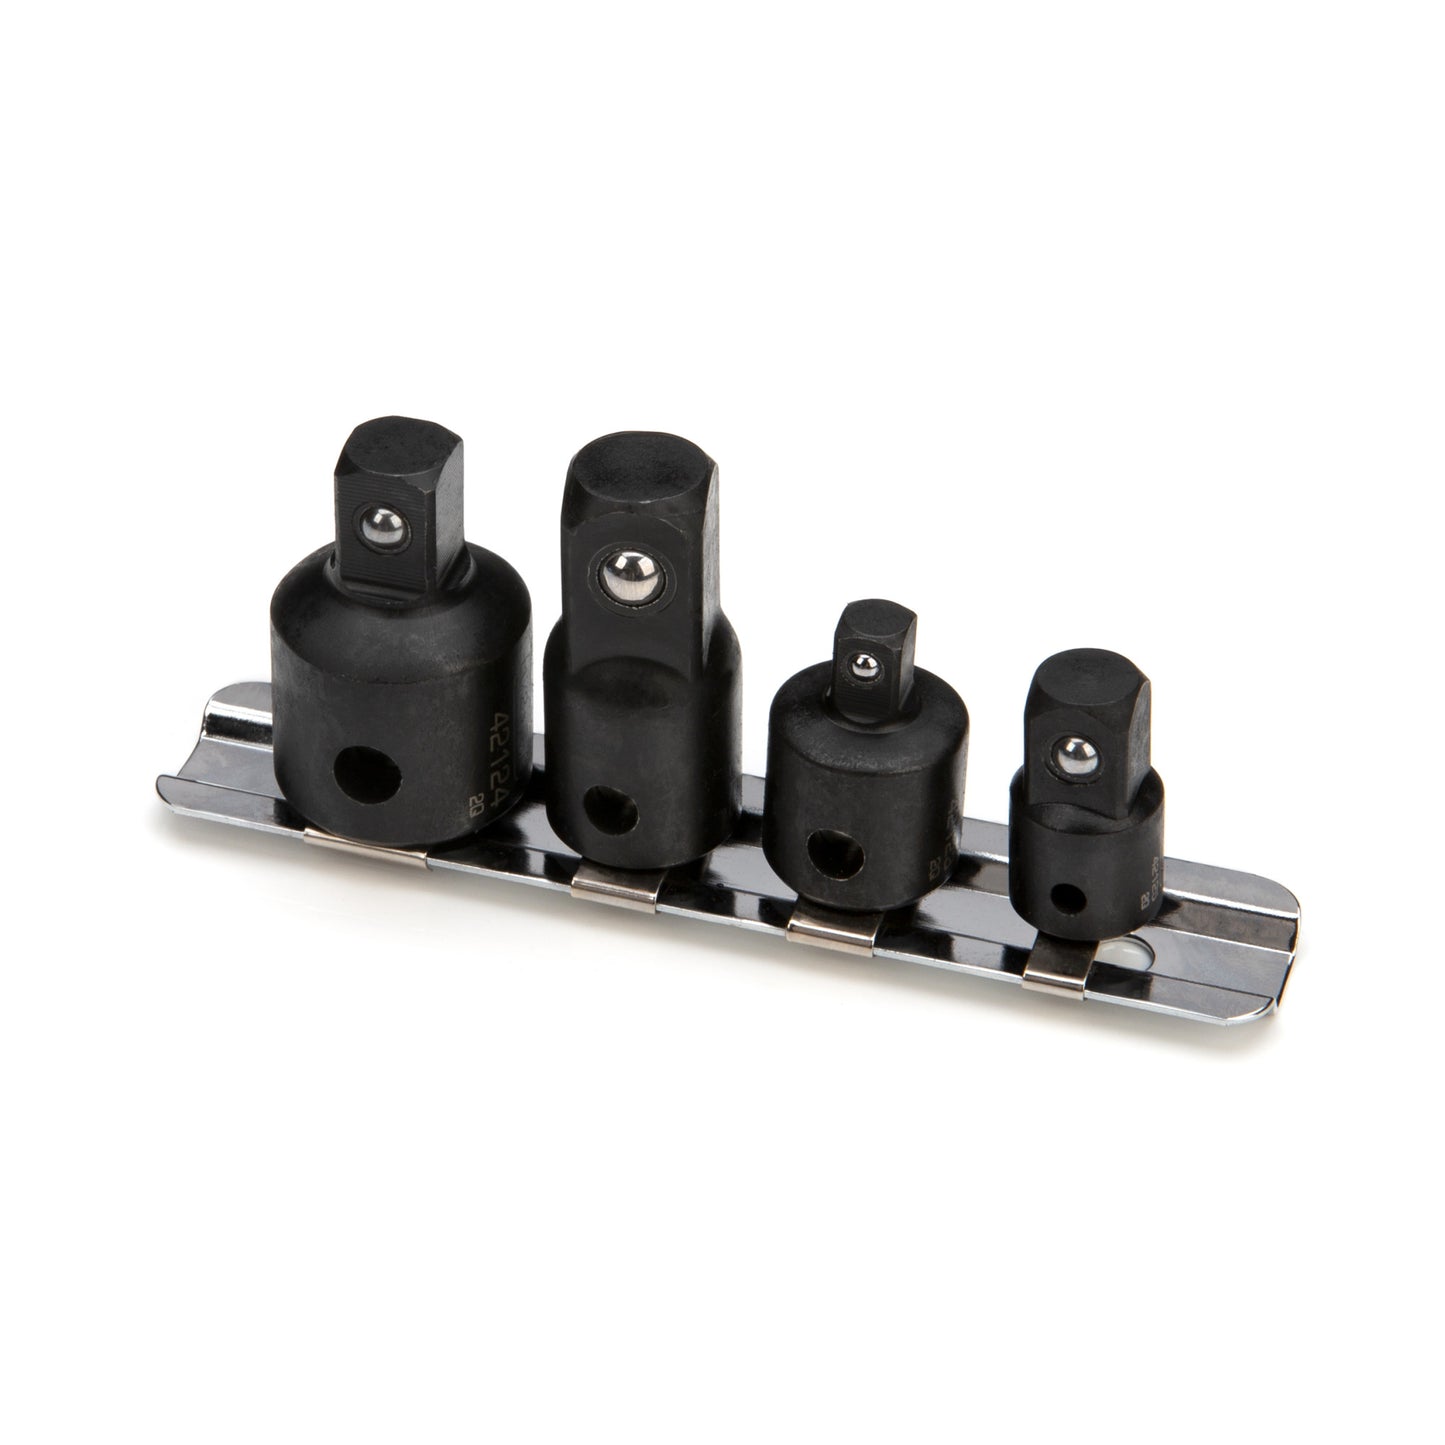 4-Piece Impact Adapter and Reducer Set, 1/4-Inch, 3/8-Inch, and 1/2-Inch Drive Sizes